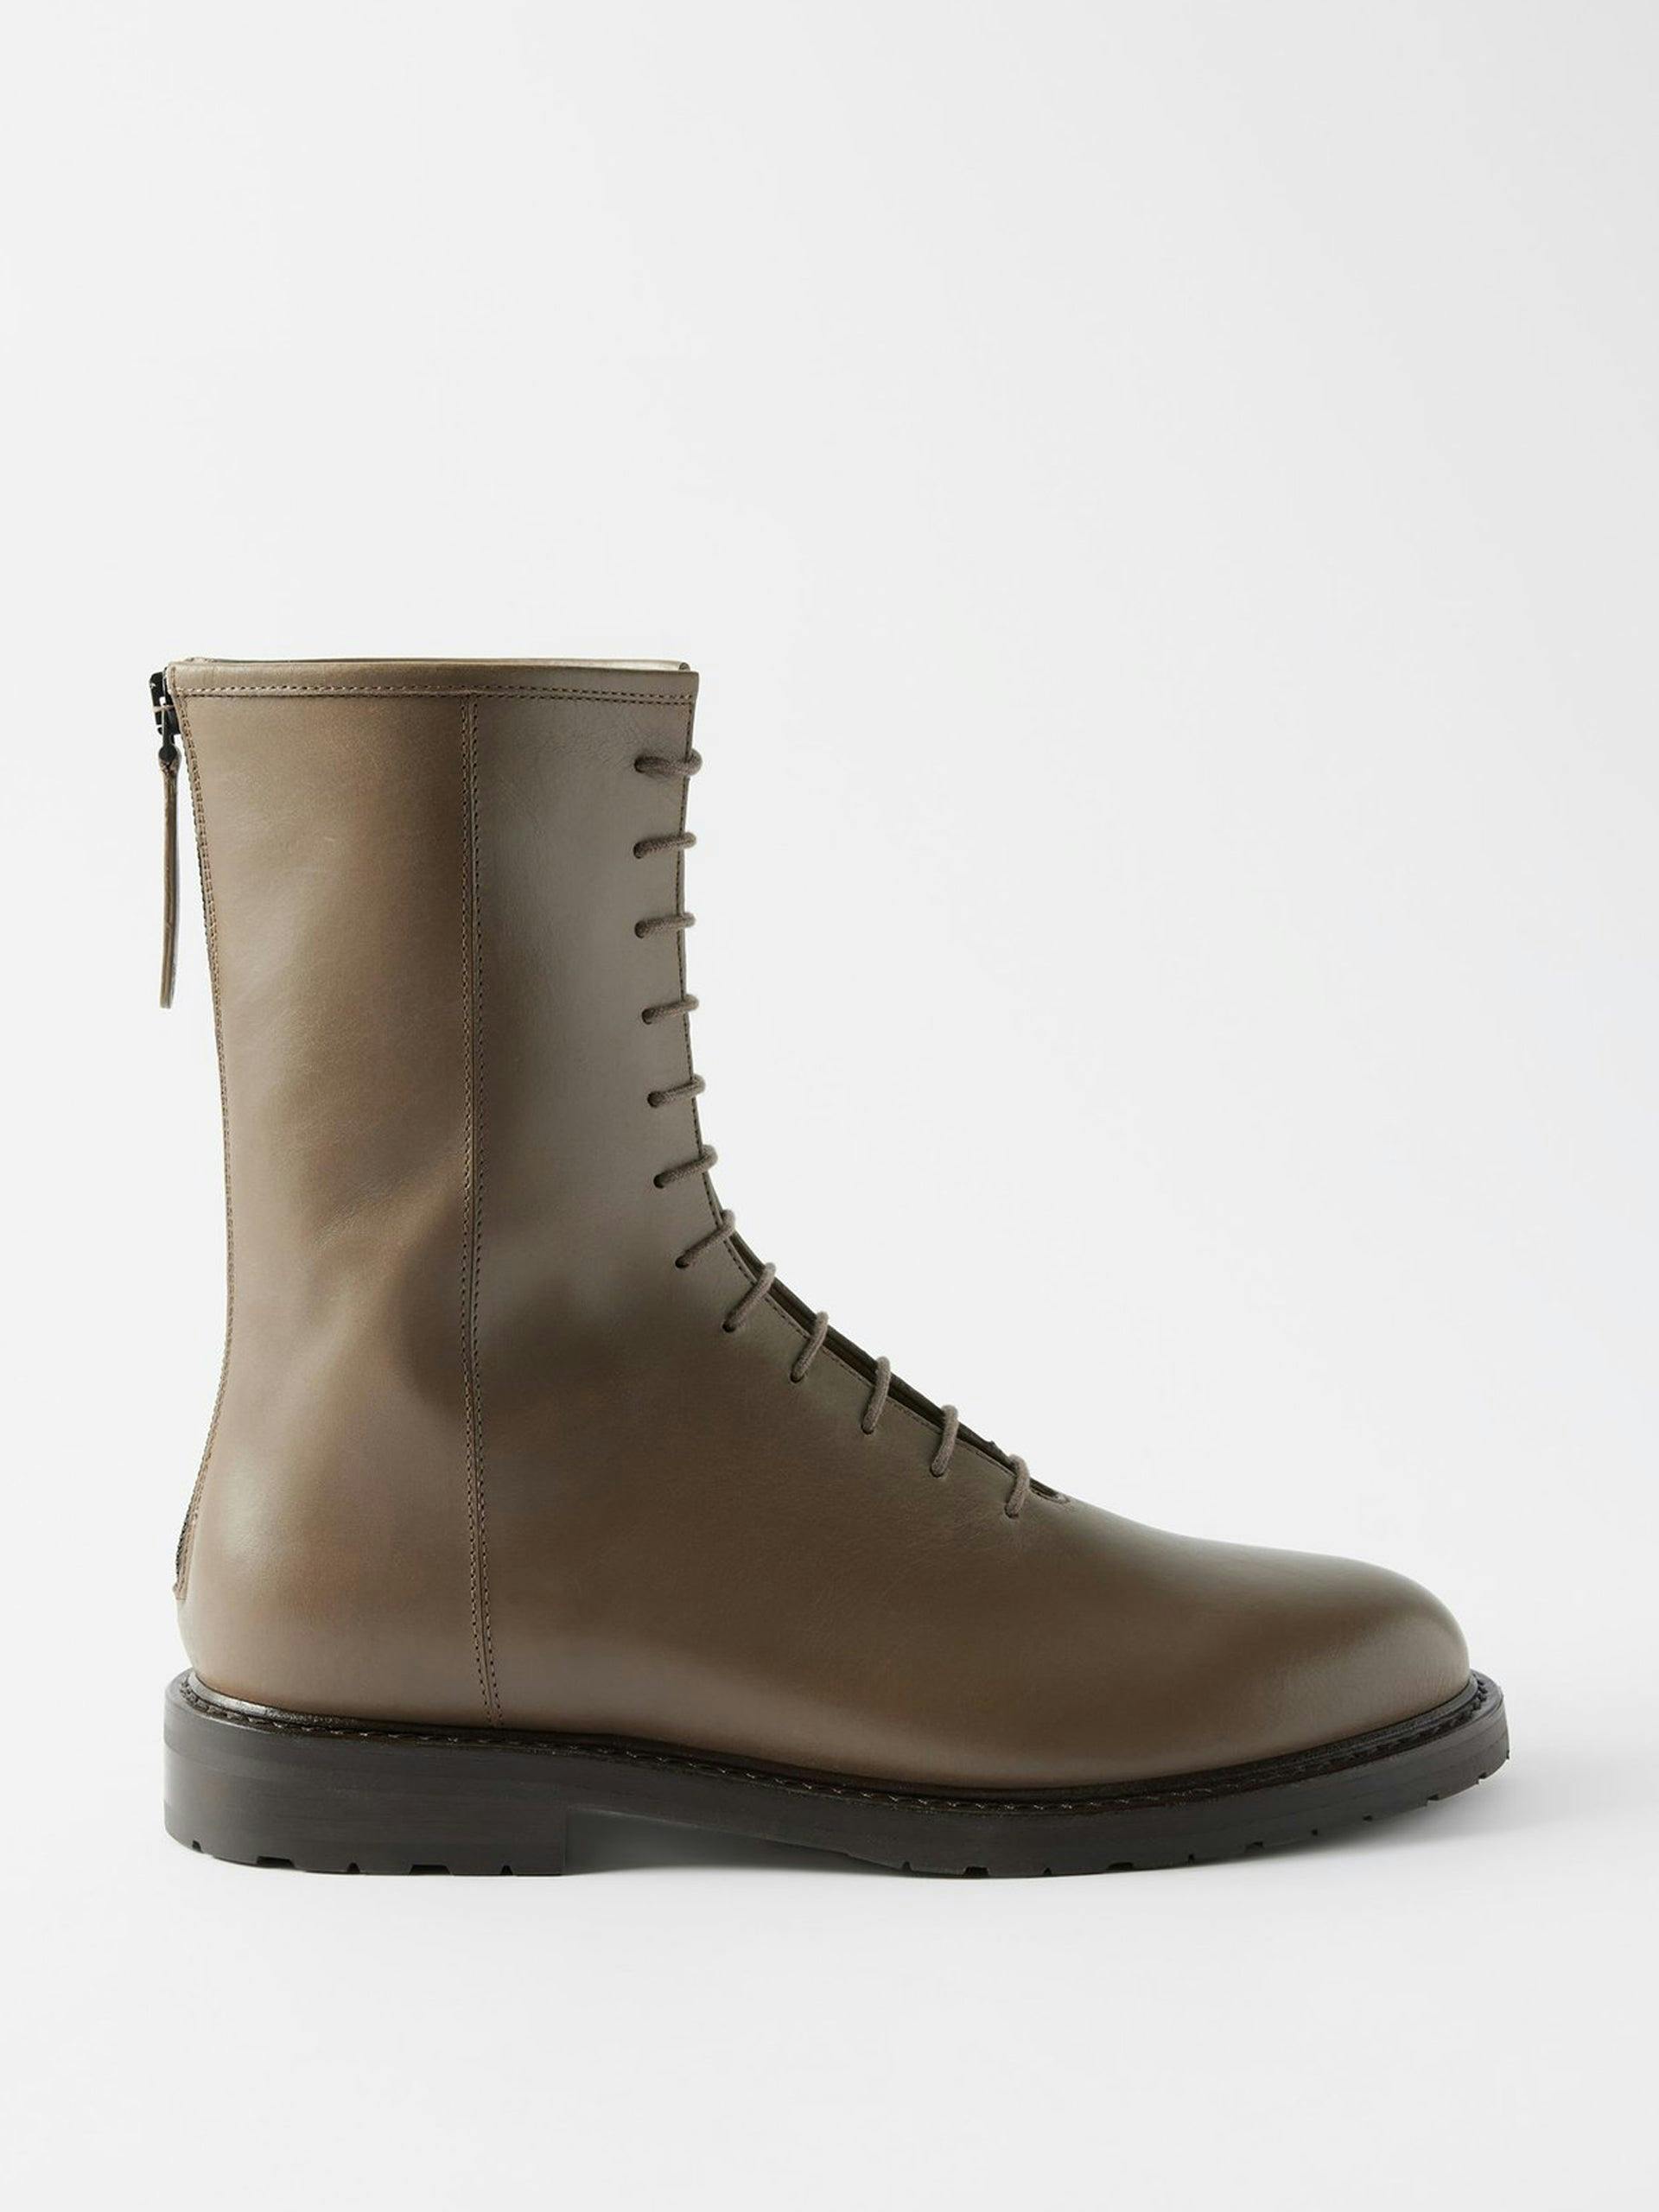 Model 08 lace-up leather boots